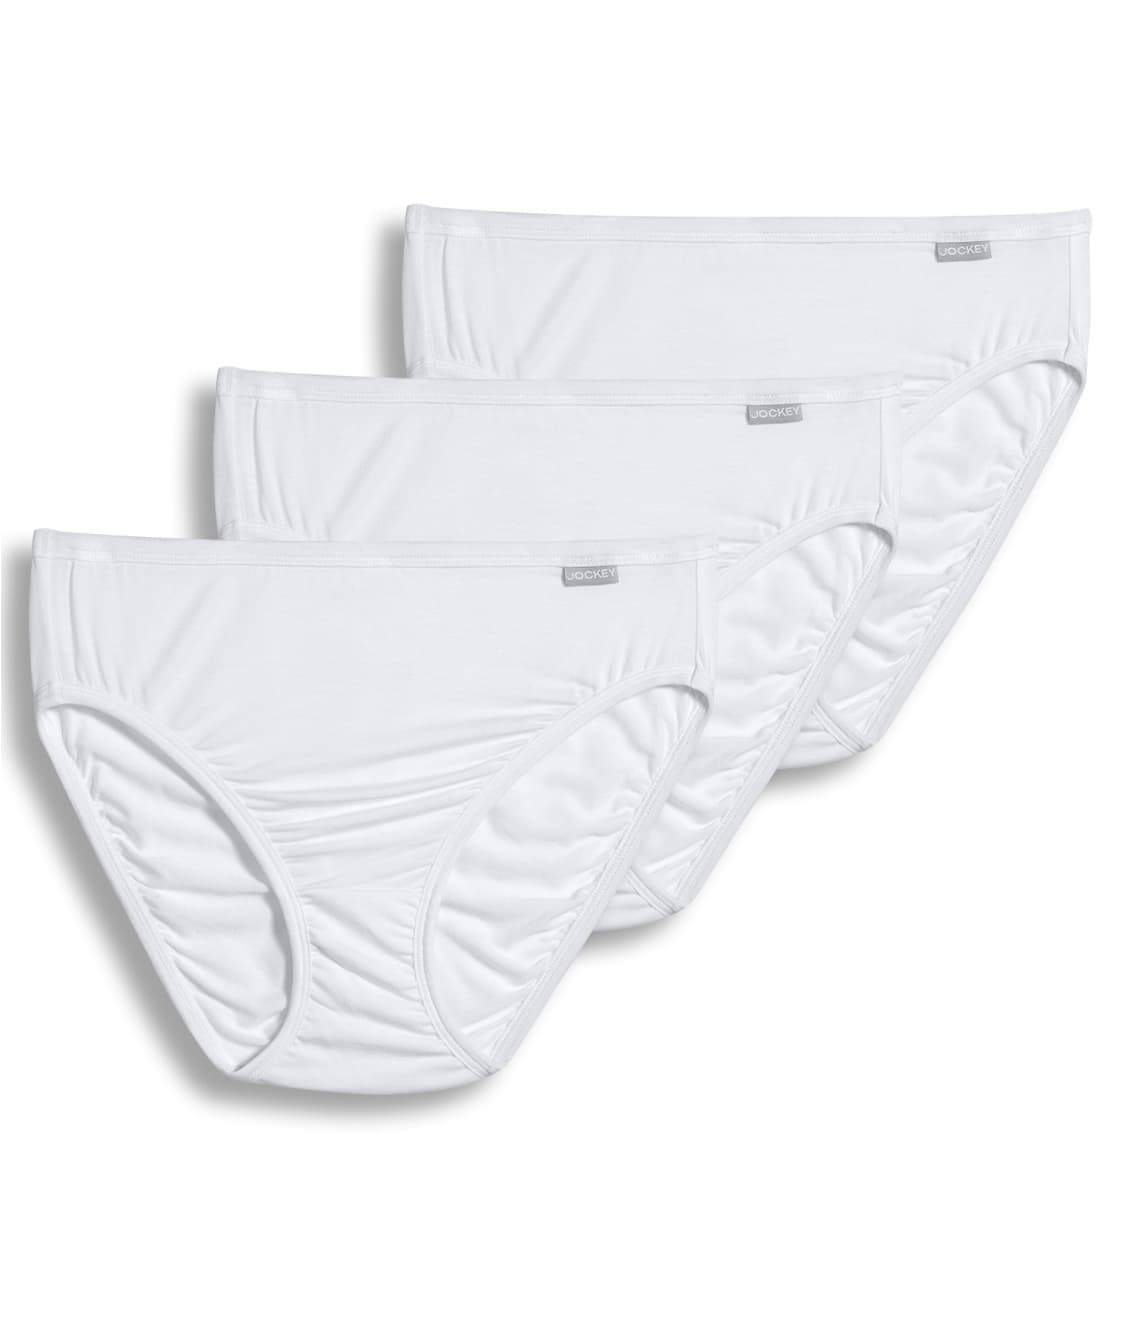 Jockey Elance Supersoft French Cut Brief 3-Pack & Reviews | Bare ...